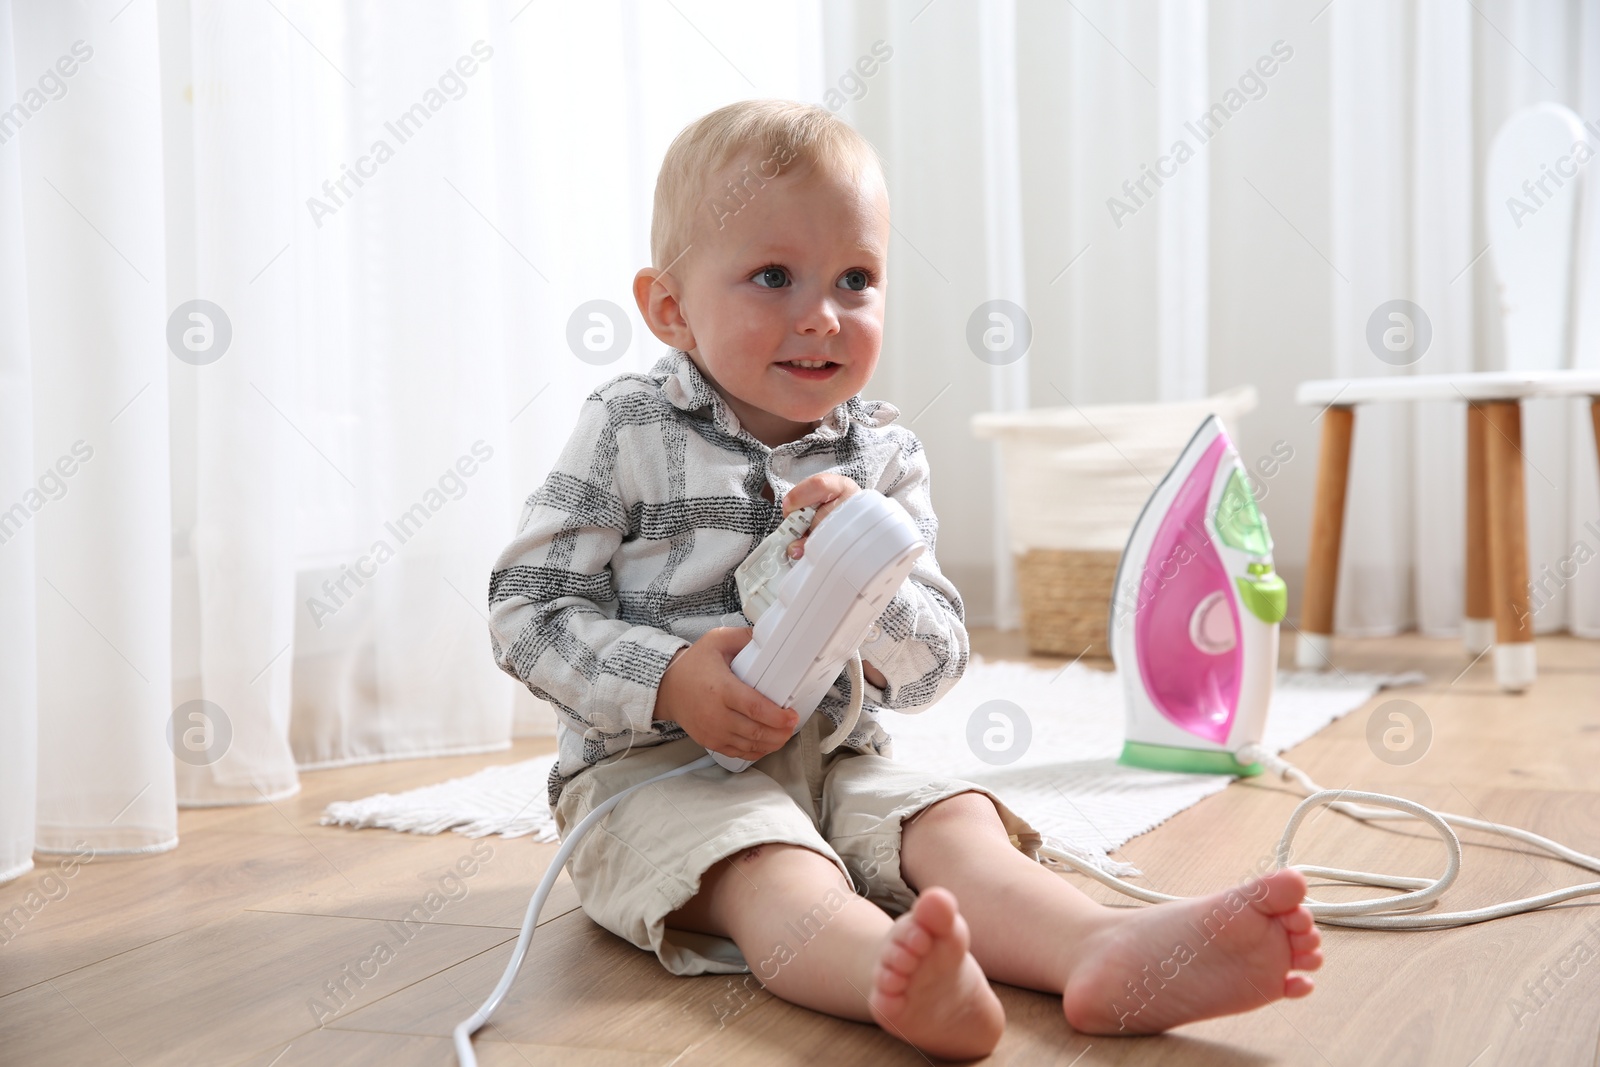 Photo of Little child playing with power strip and iron plug on floor at home. Dangerous situation